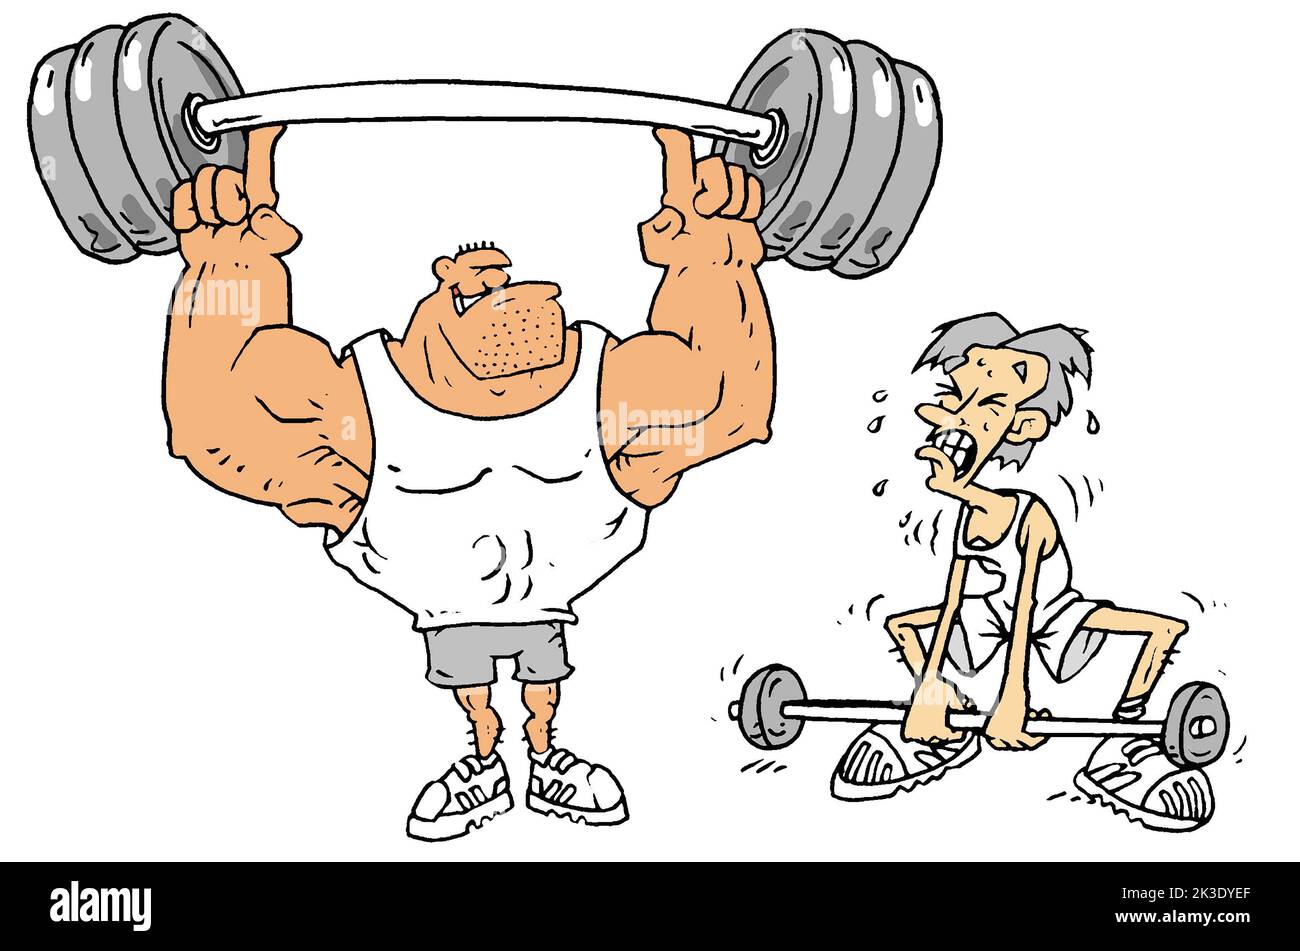 Funny cartoon art, two men lifting weights. The experienced man lifts large weights with his fingers. The beginner struggles with a smaller weight set Stock Photo